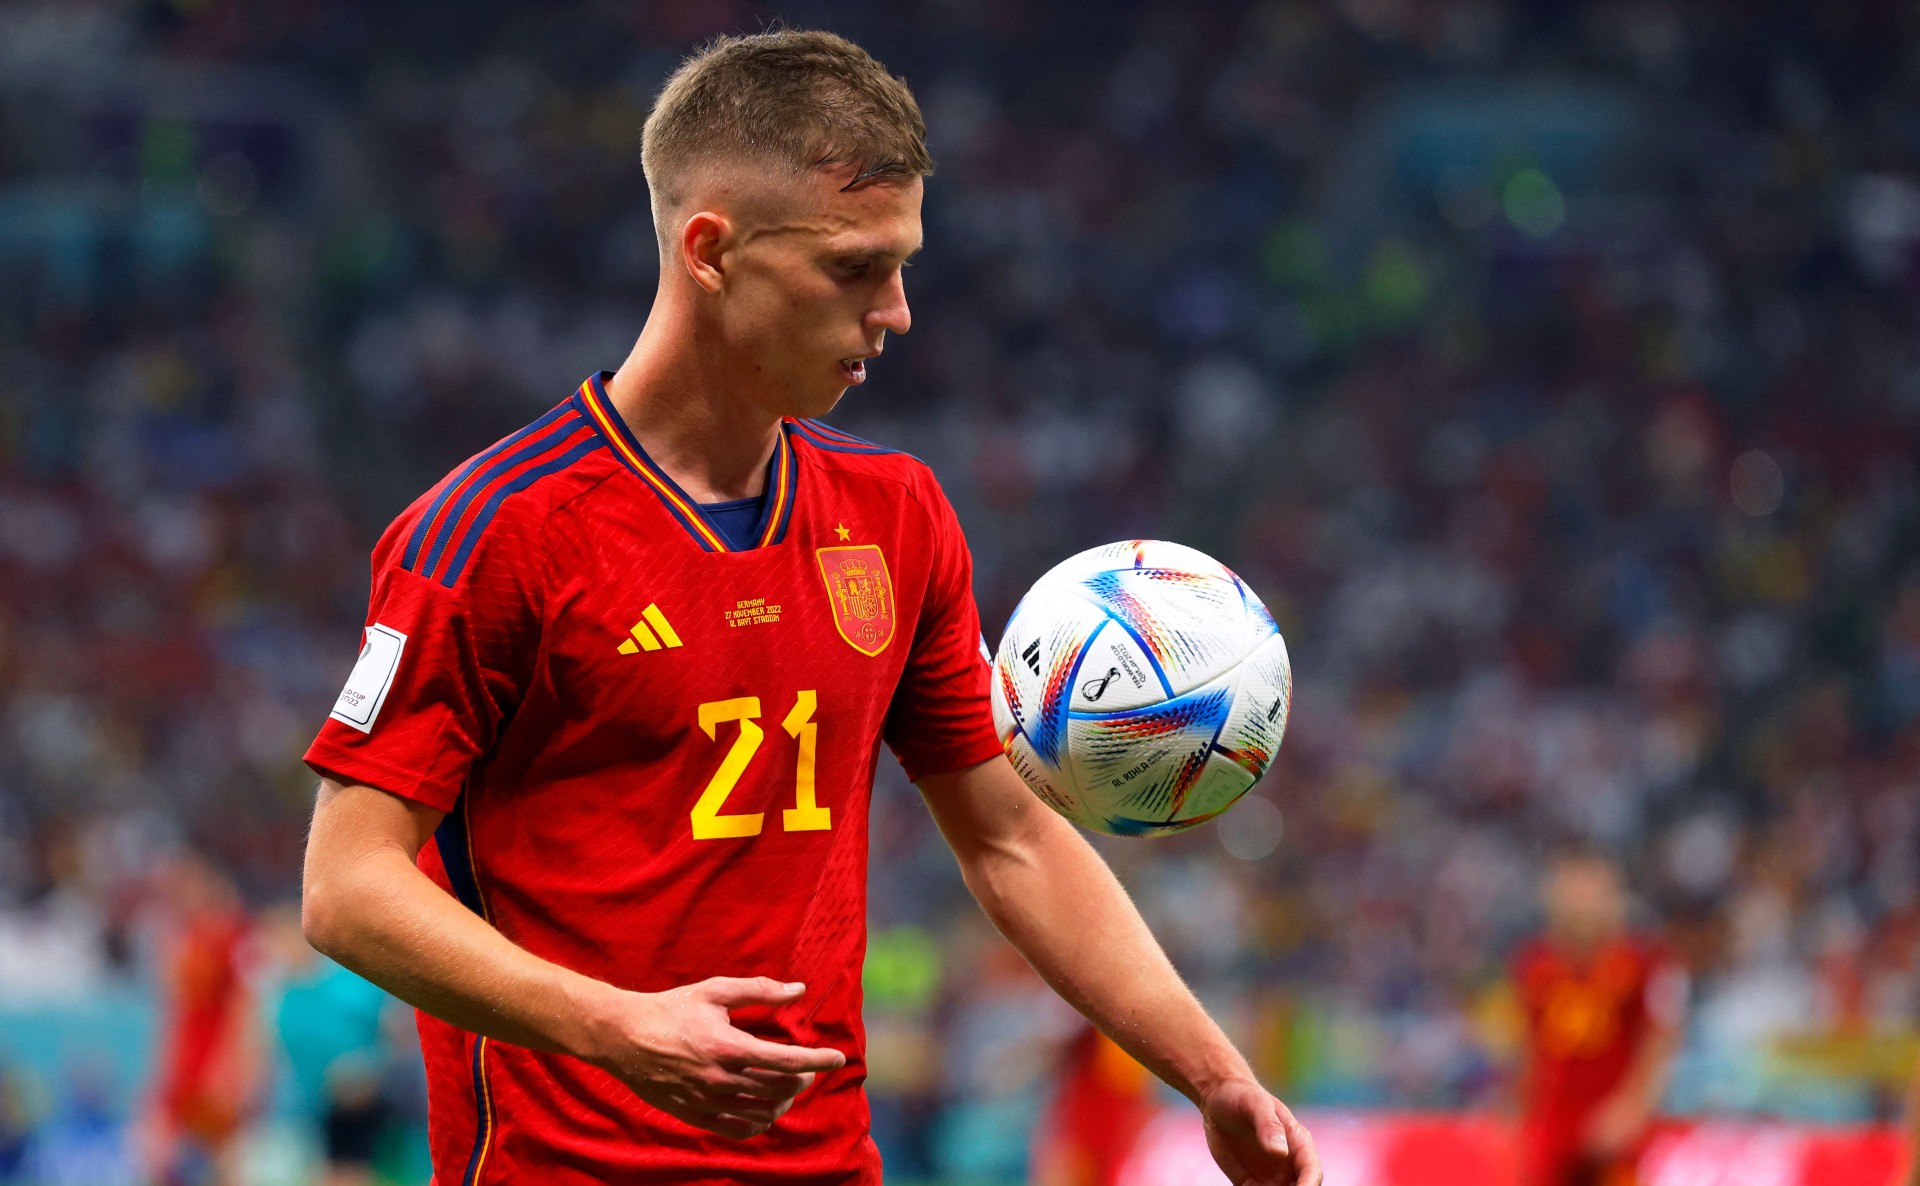 Barcelona meeting with Dani Olmo’s father was regarding Manchester United target, not Spain star